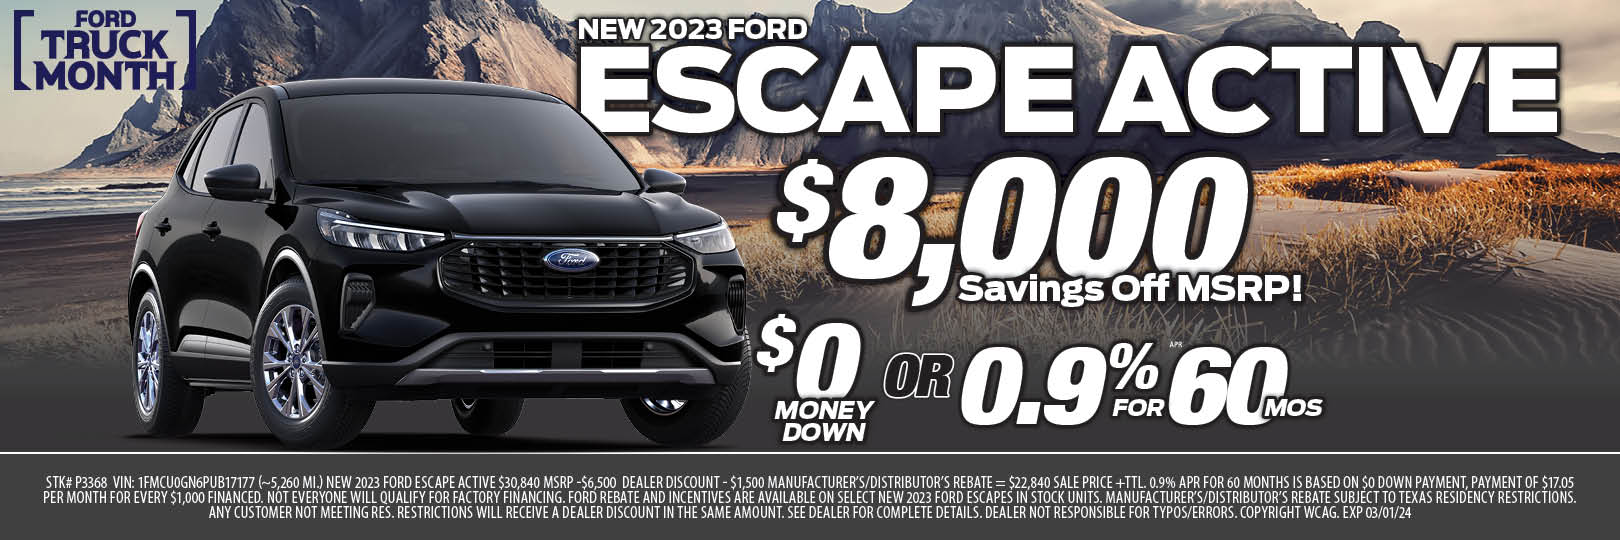 Ford Escape Special Savings